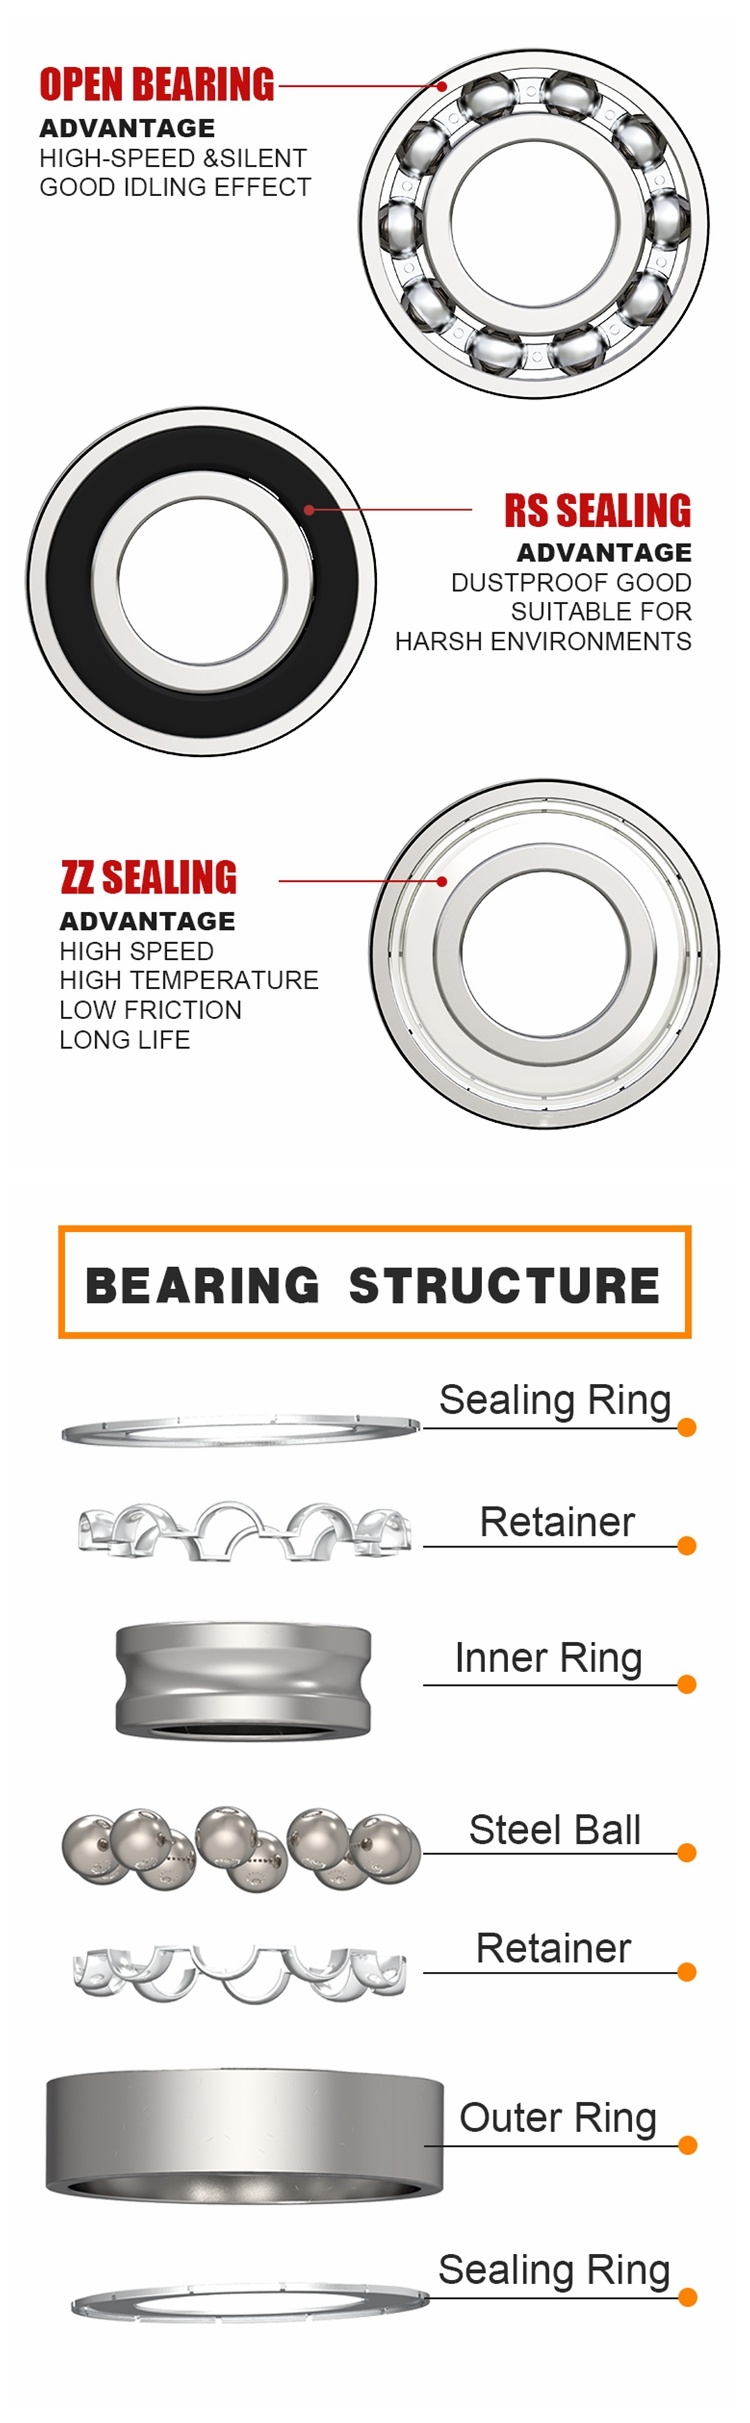 High Precision Bicycle Bearing Steel Cover 6705 Zz Ball Bearings